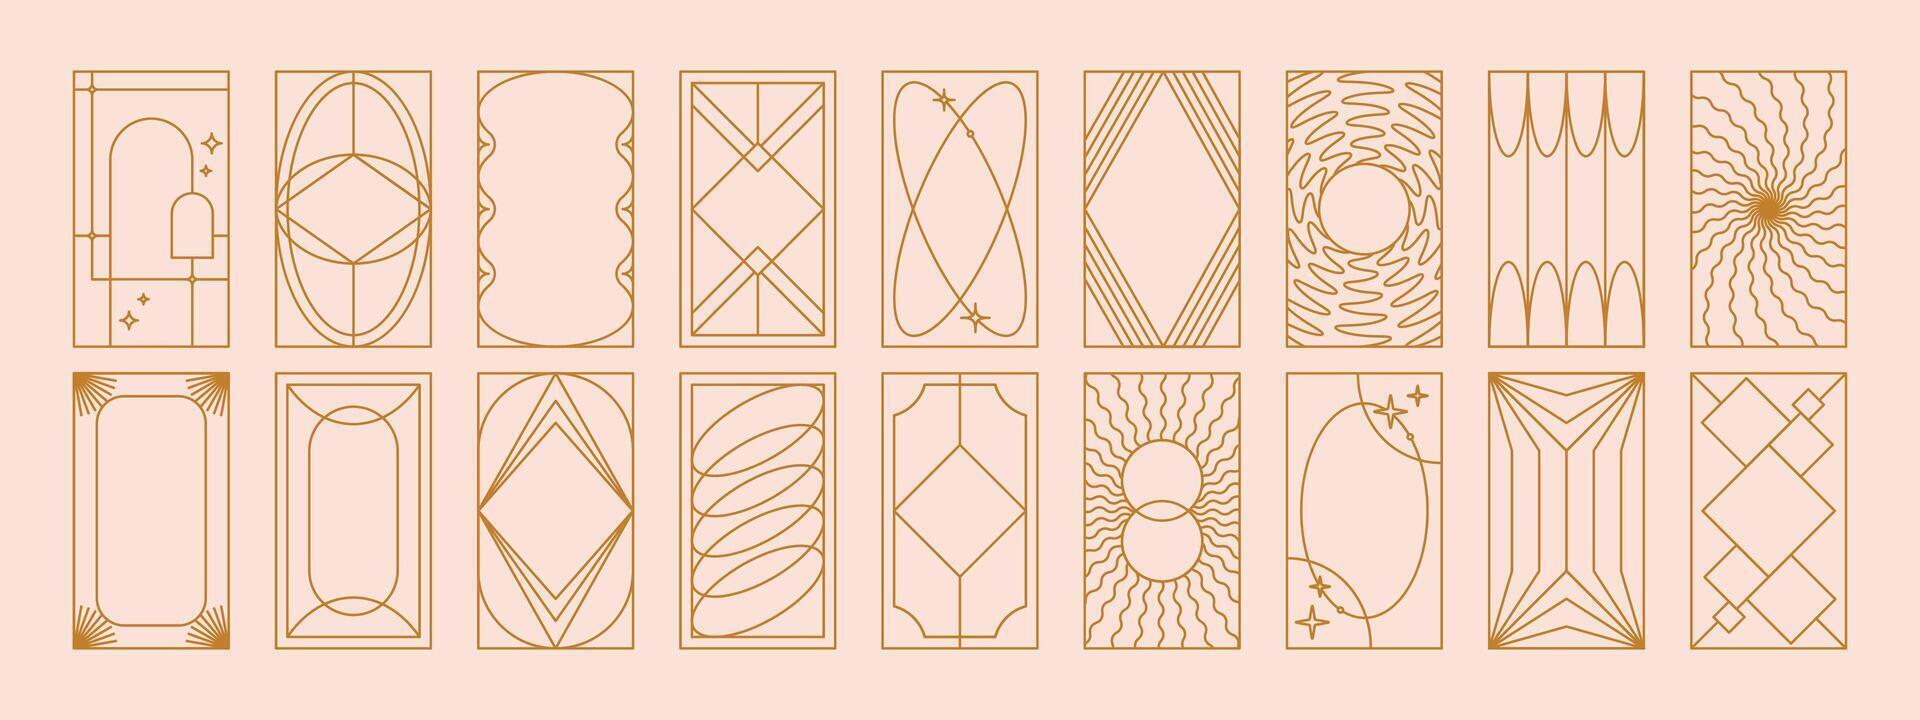 Modern aesthetic linear frame collection. Arch frames with sparkles and geometric forms for social media or poster design vector